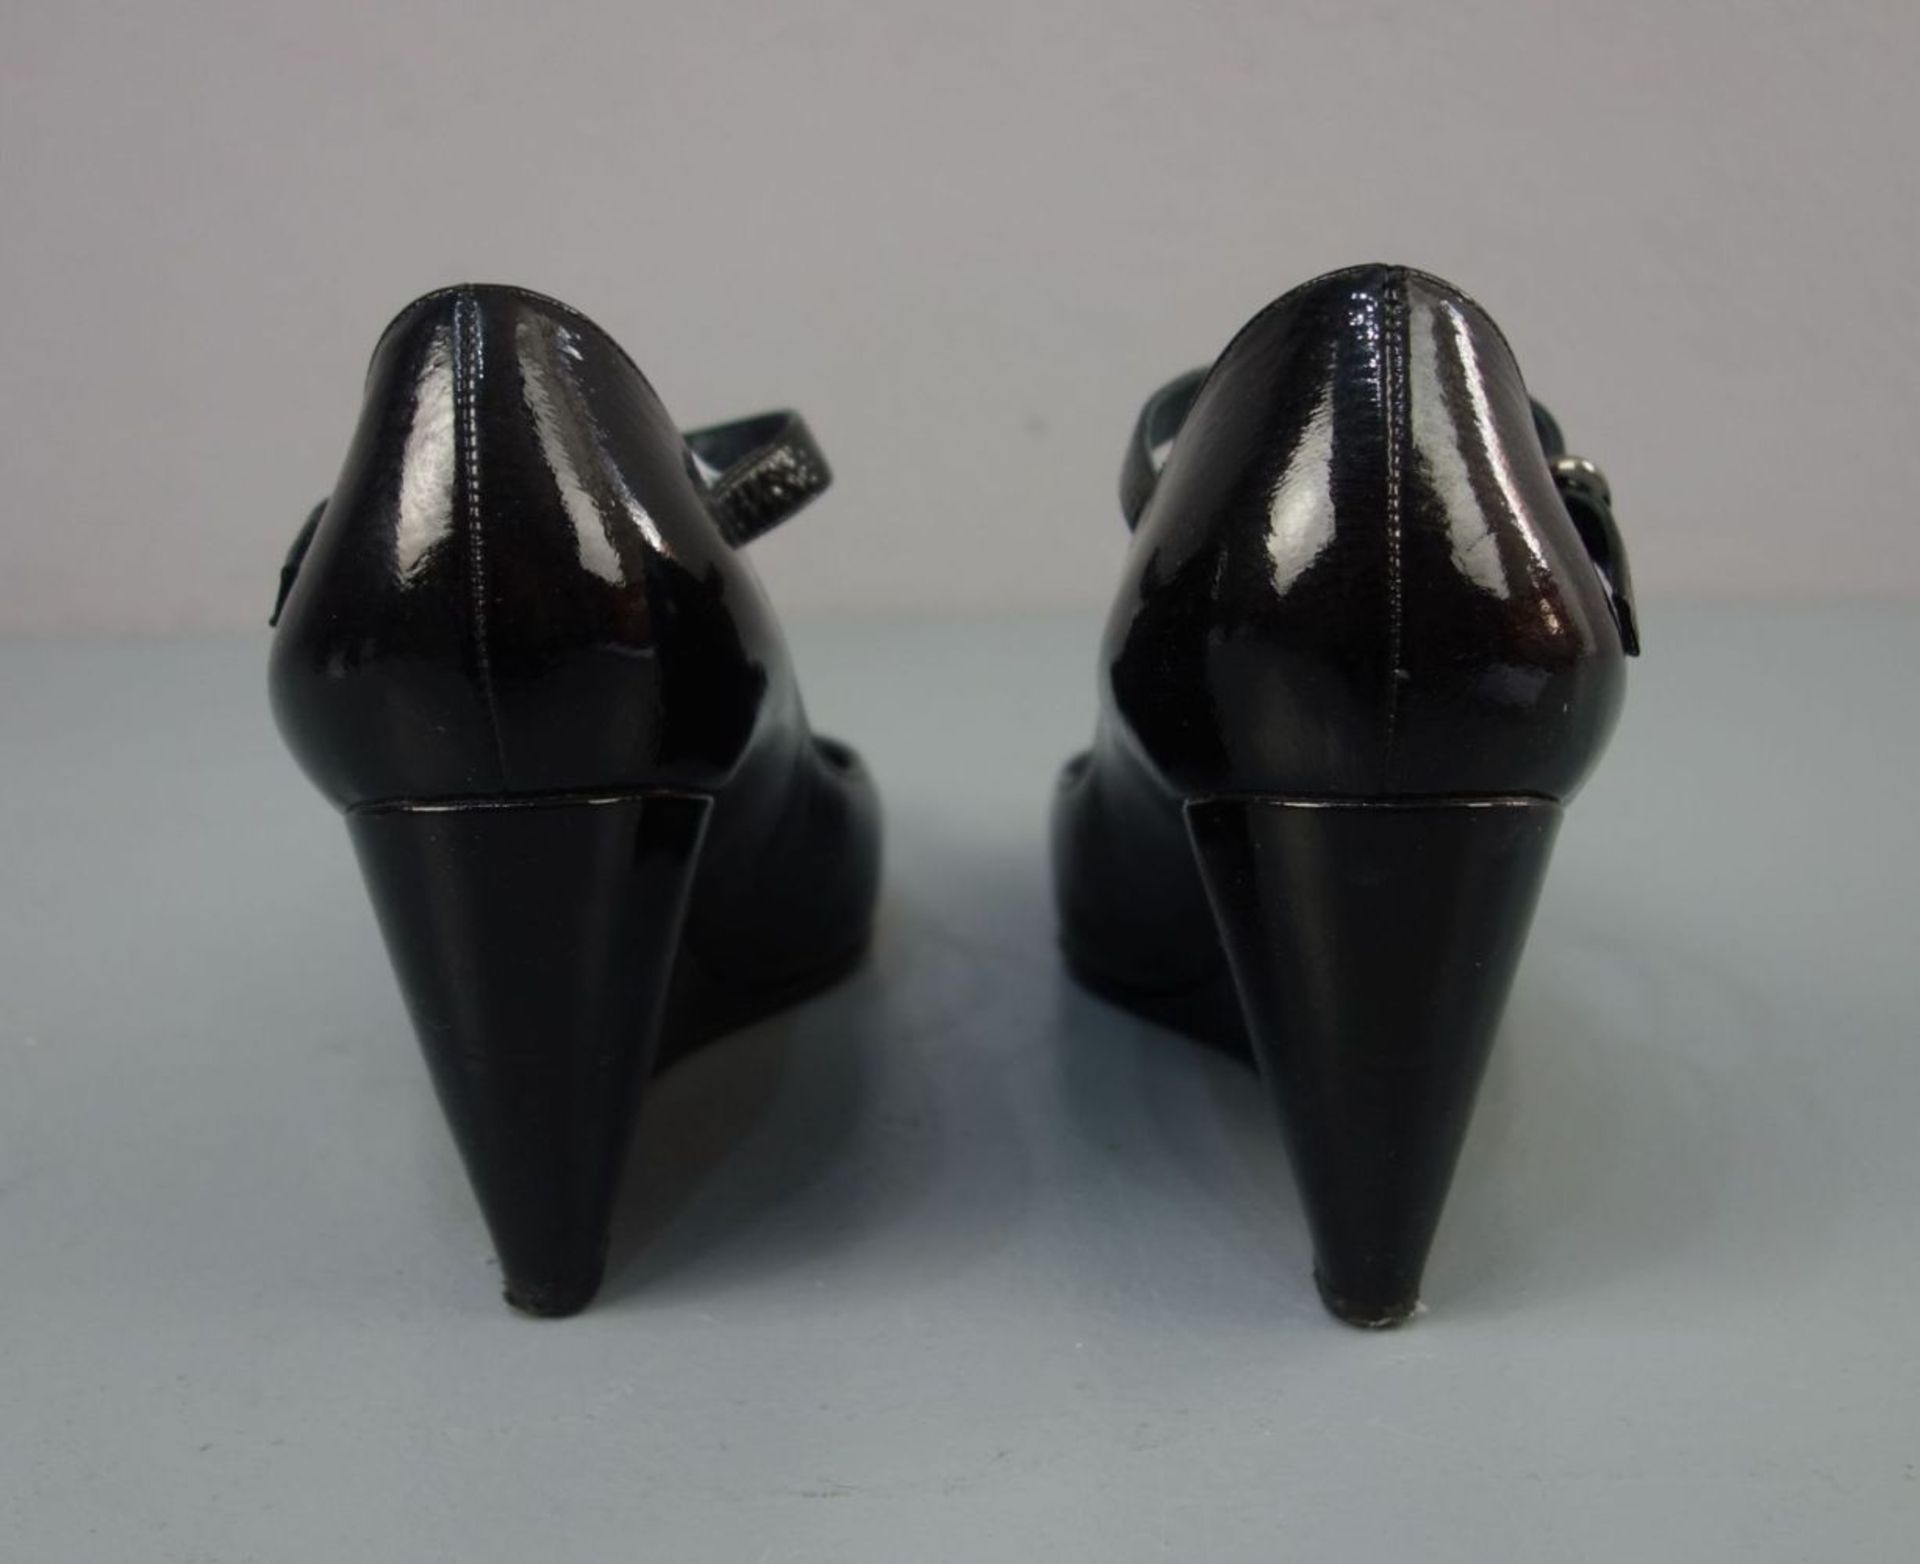 SERGIO ROSSI KEILPUMPS / women's shoes with wedge heel, Made in Italy, schwarzes Lackleder. Pumps - Image 3 of 6